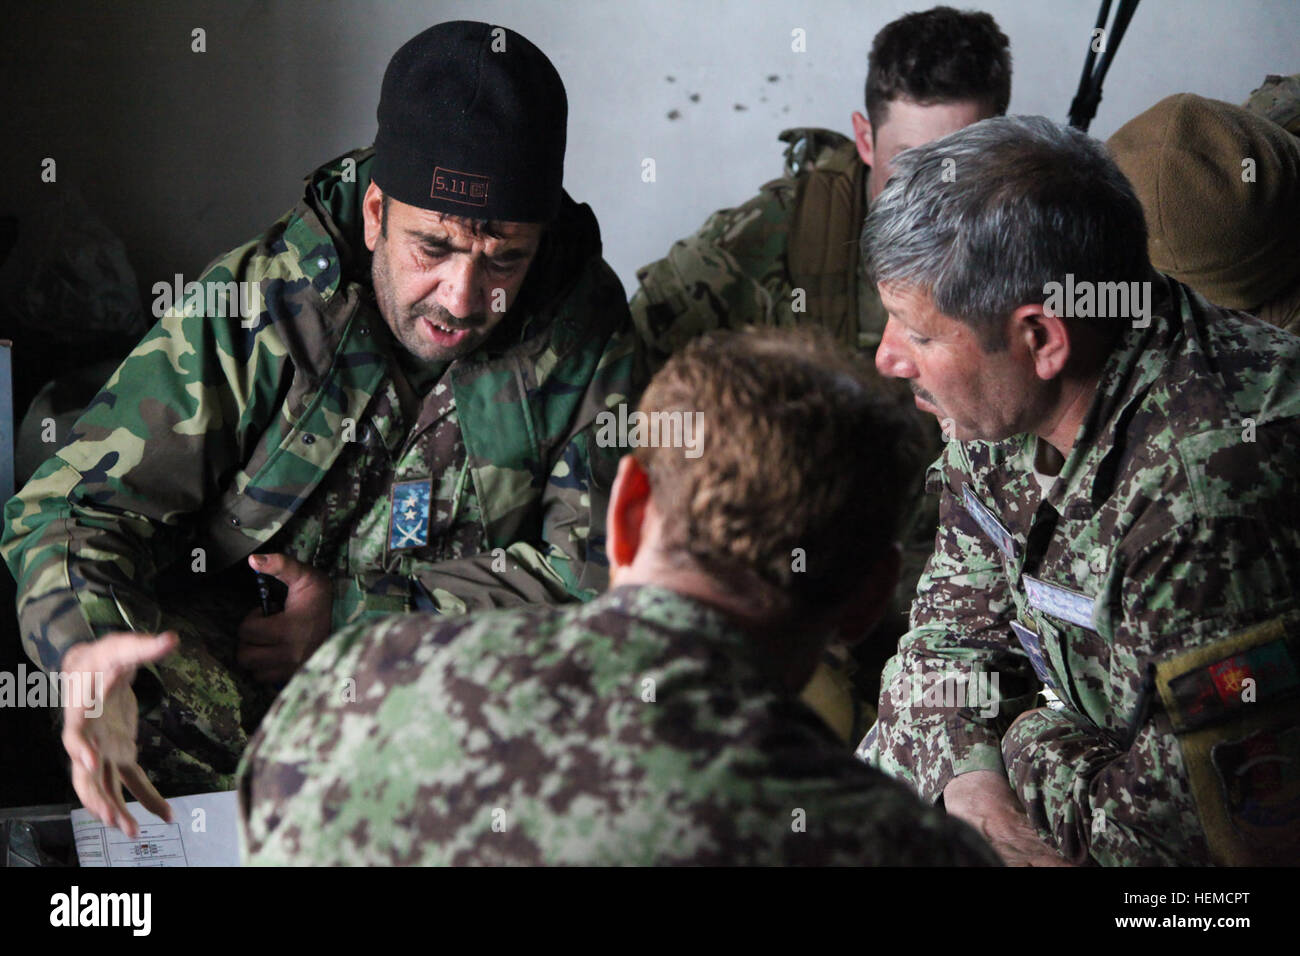 Afghan National Army (ANA) Lt. Col. Omar Gul with the 2nd Kandak, 4th Brigade, 201st Corps, speaks with other ANA officers about a clearing operation while looking at a map in a temporary ANA tactical operations center in Bati Kot, Nangarhar province, Afghanistan, Dec. 13, 2012. The ANA were conducting the clearing operation to deny insurgents the freedom of movement and to secure a local highway. (U.S. Army photo by Spc. Jenny Lui/Released) SFAAT Advise and Assist in Sector 121213-A-TT389-146 Stock Photo